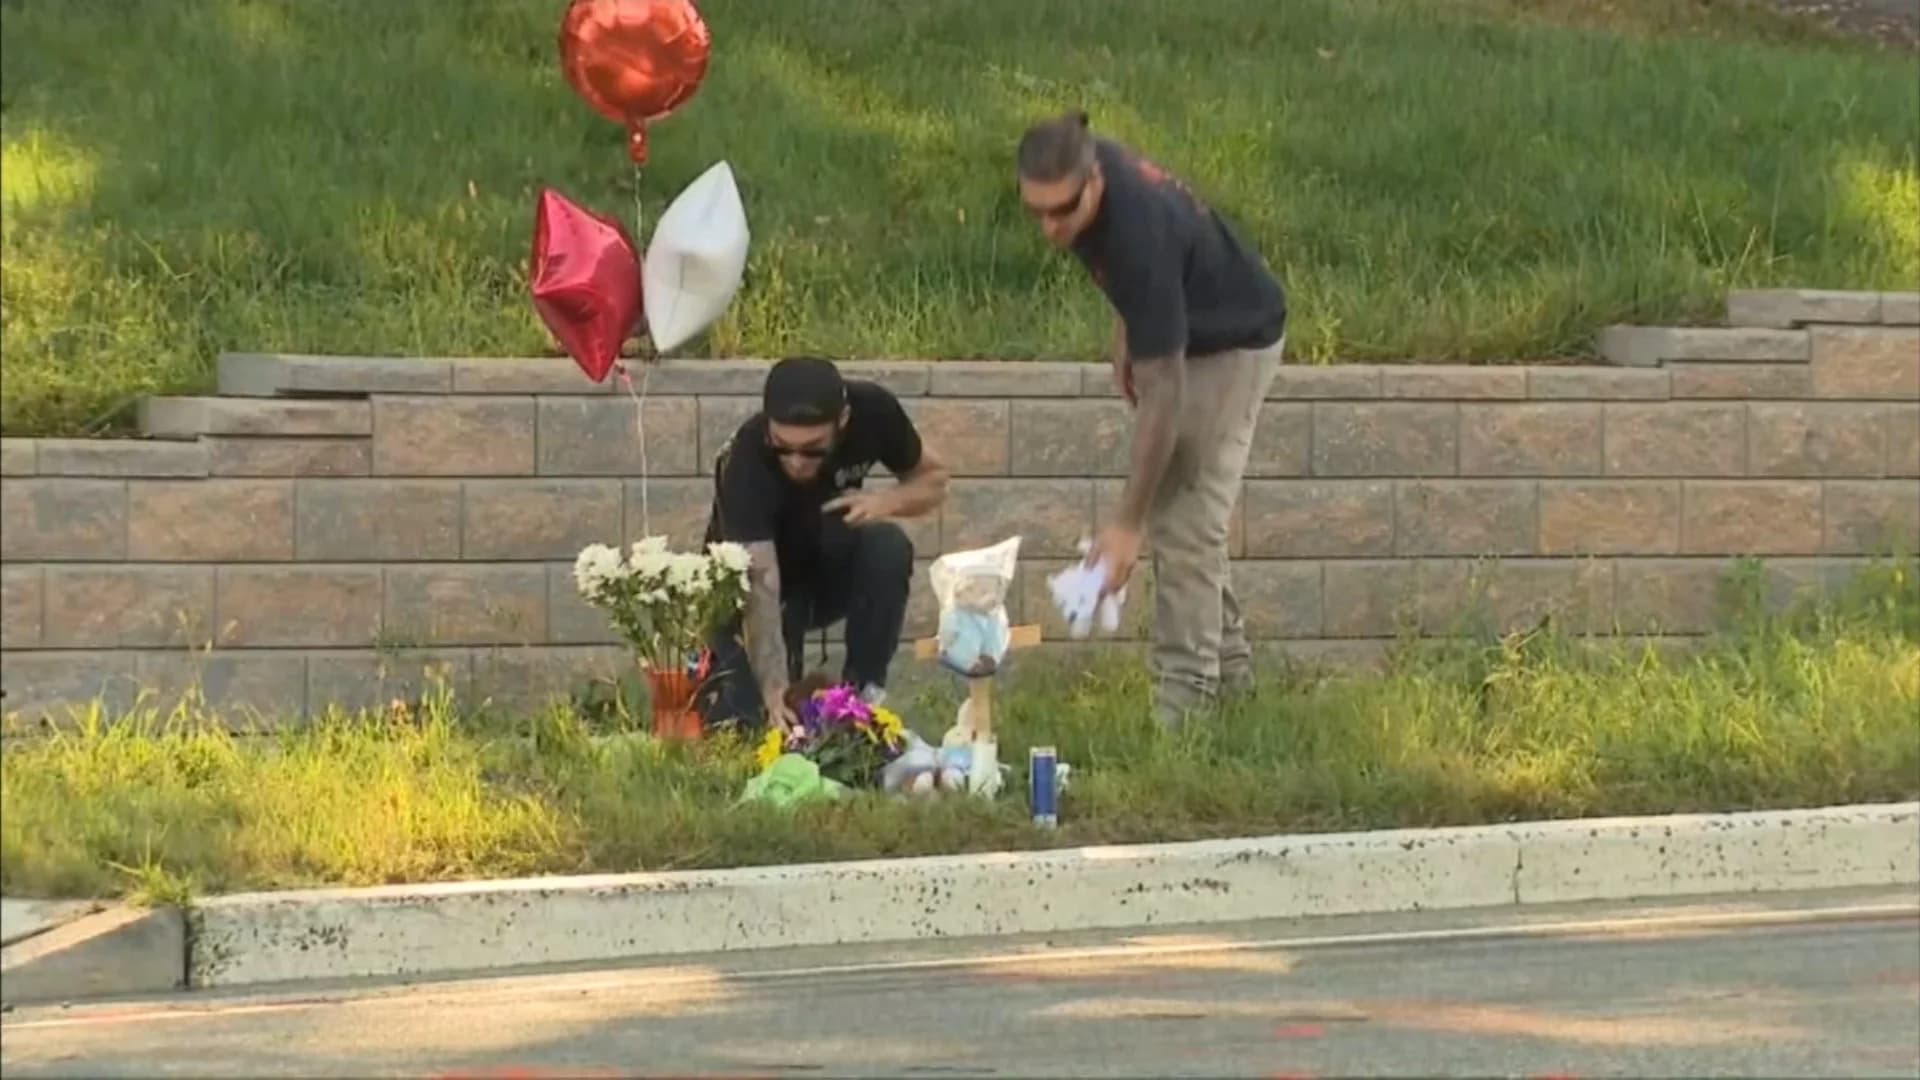 Community mourns 2-year-old struck by dump truck in Stanhope